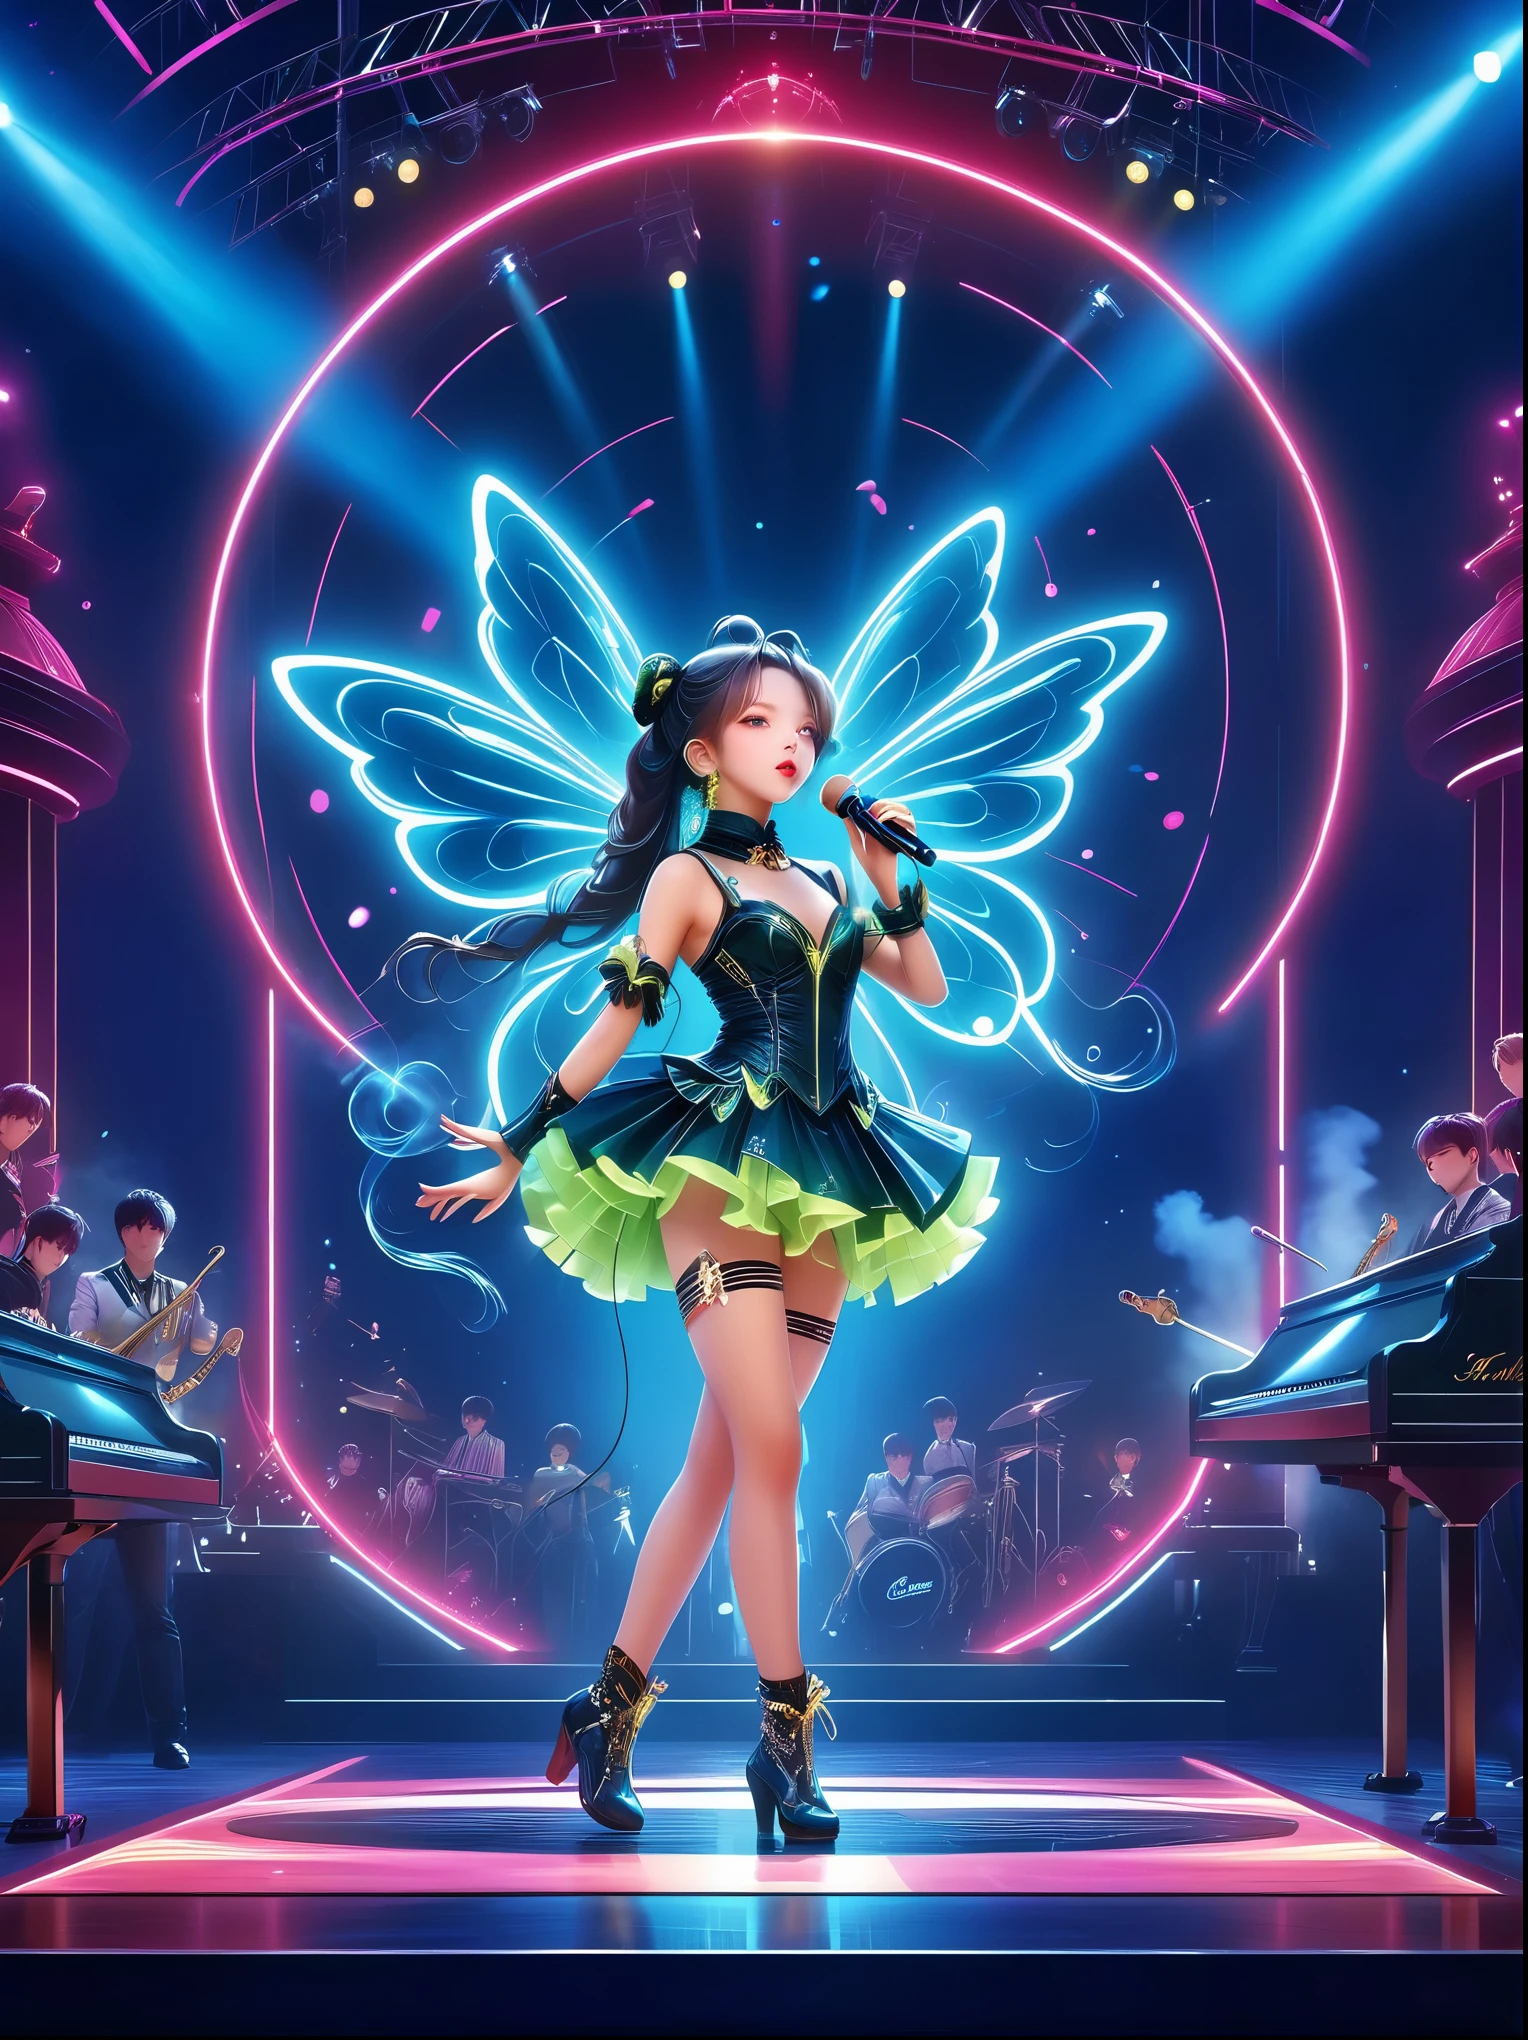 (Vision:1.8)，1girl, concert，(audience:1.5), (Idol stage:1.5)，1 beautiful young female idol, Wearing futuristic costumes, (((microphone)))，(Singing on the Idol stage:1.6), futuristic stage, (complex stage design:1.3), (Mechanical stage elements:1.5), Dreamy atmosphere, Starry sky background, (lunar backdrop:1.5), shining lights, Neon embellished, The stage is filled with smoke，Lights focus on people，It creates a mysterious and charming atmosphere，Even more attractive against the shadow background，Laser shows and moving stage effects complement the pulsating neon lights，Create a vibrant performance atmosphere，The stage floor is gleaming，The crowd was enthusiastic，Warm atmosphere，Eye-catching stage design，Full of technology，World-class production standards，Bringing a modern entertainment experience，Music and images blend perfectly，Demonstrating artistic expression and musical talent，The charming stage style makes people intoxicated，Best quality，8K, high resolution，masterpiece，Photorealistic effects，(Watching the Idol stage from a distance:1.6)，((Stage scene in telescope))